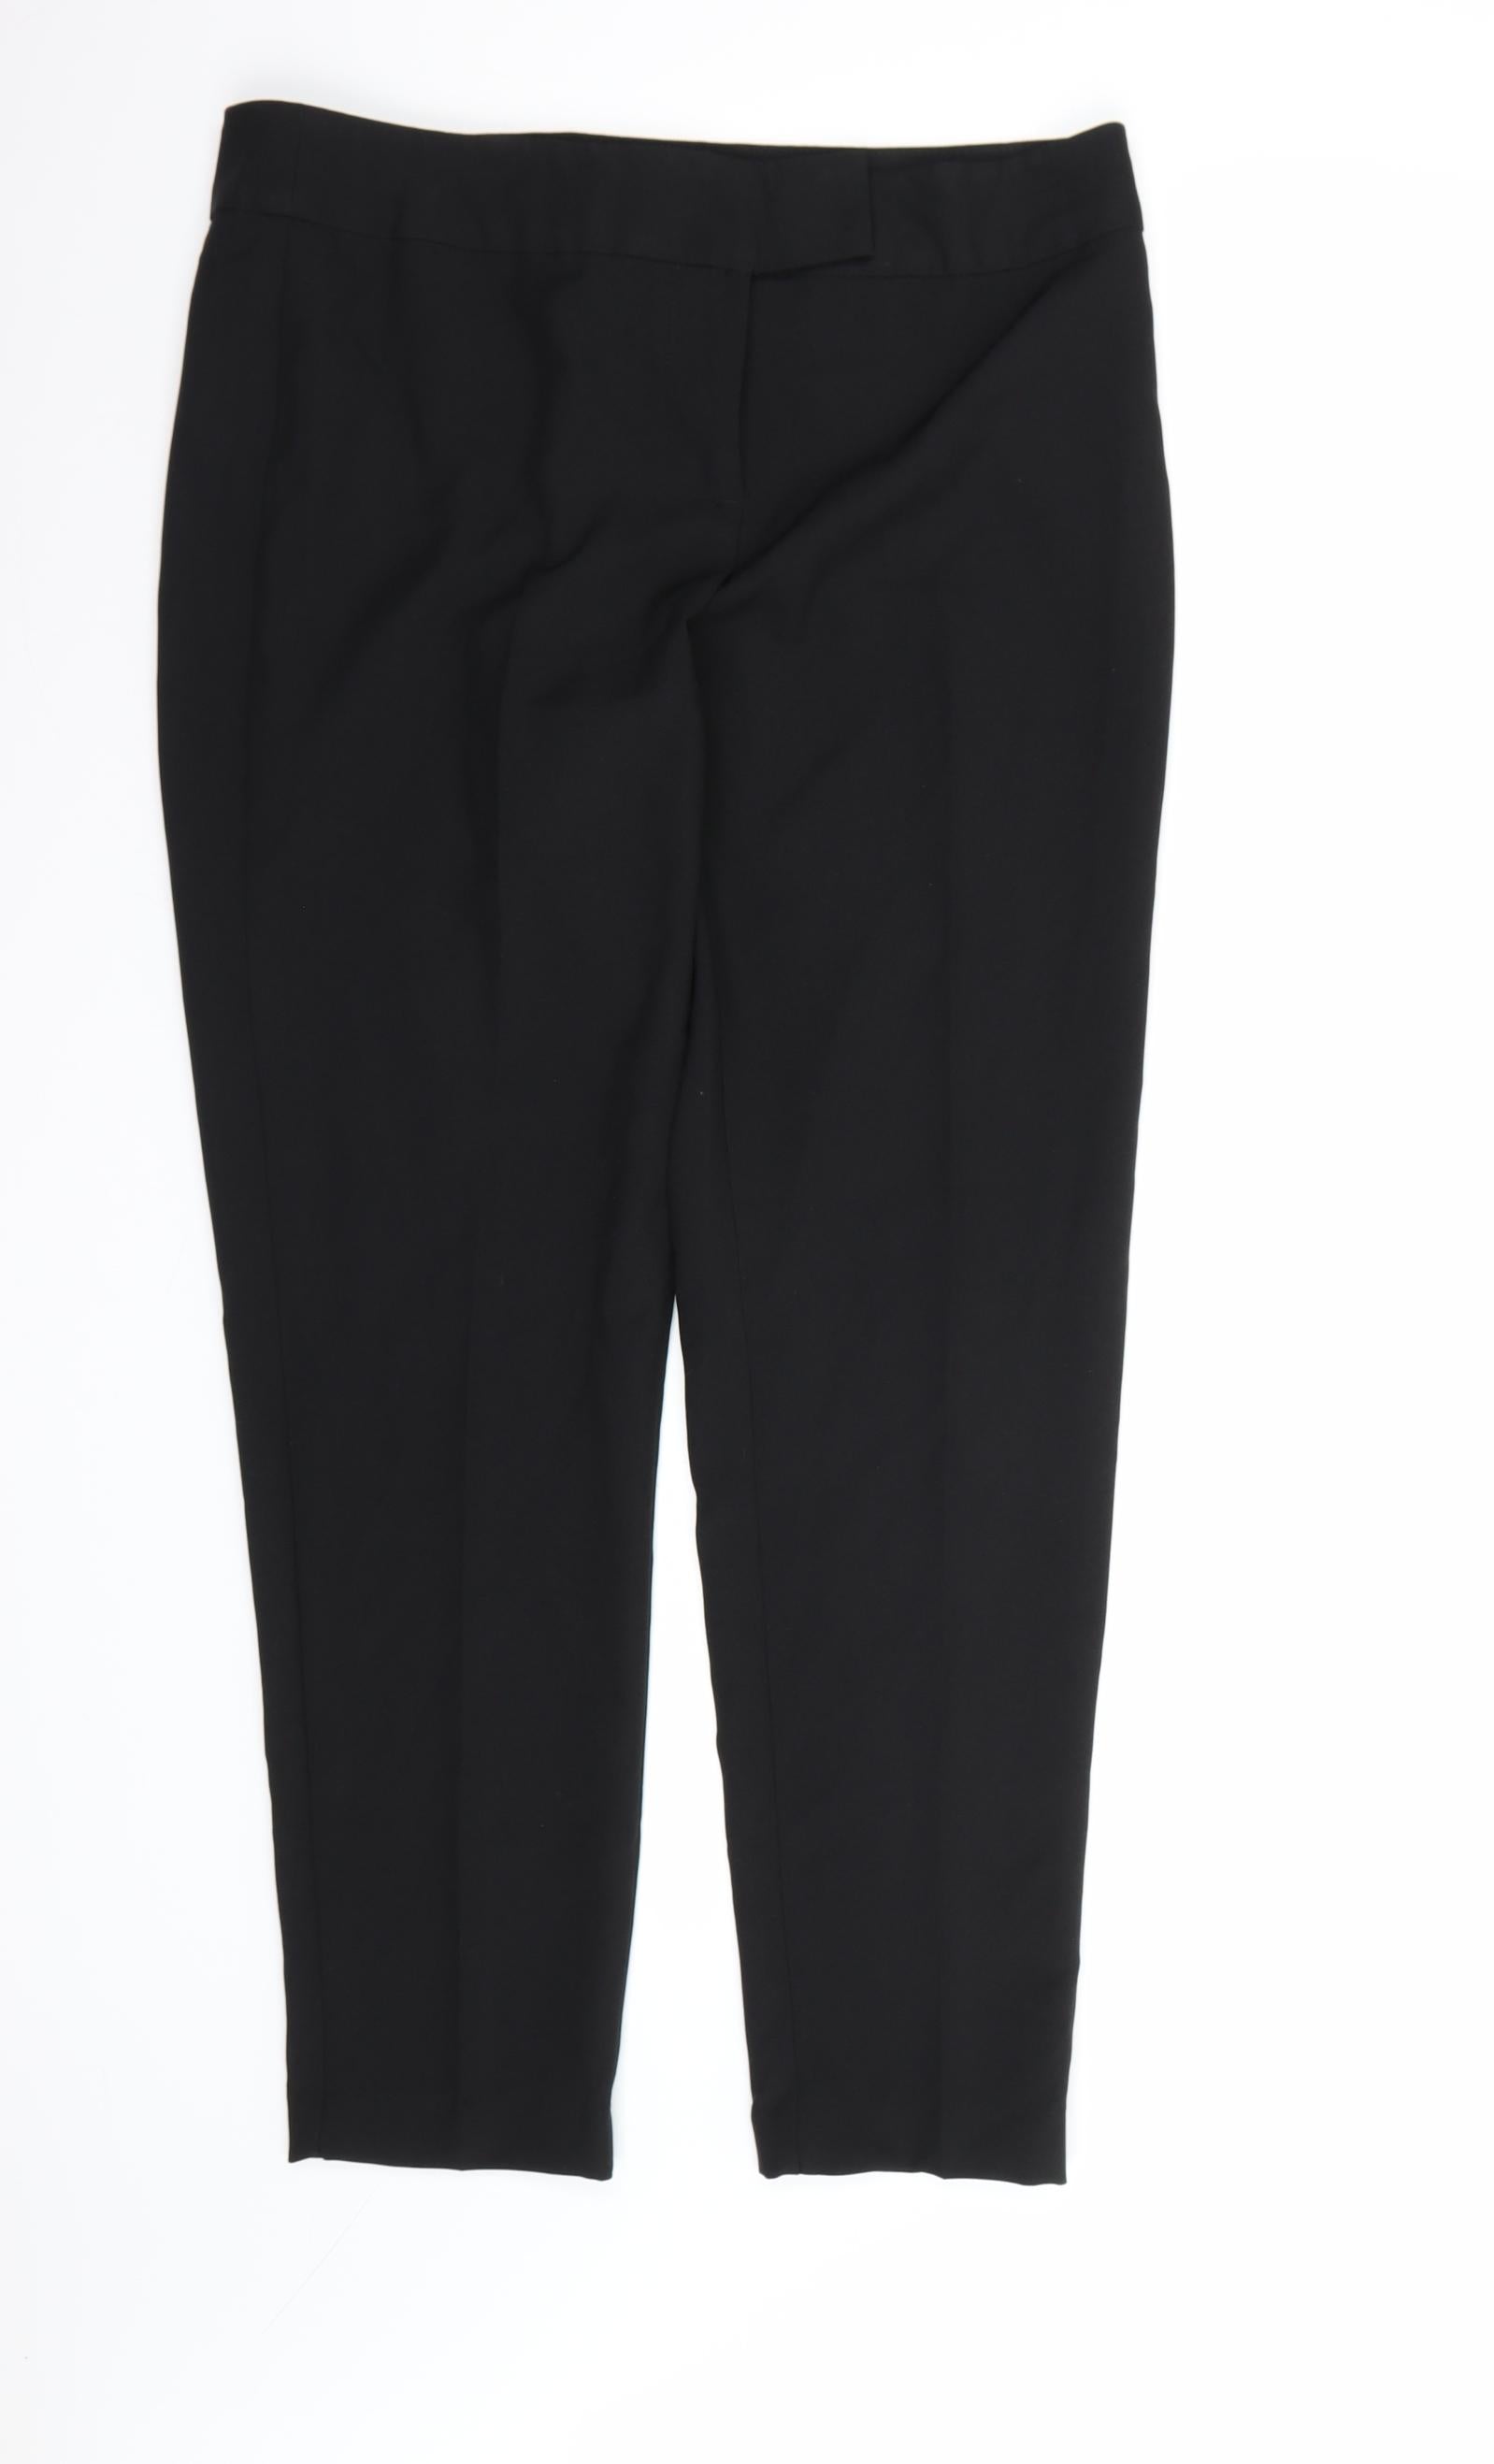 George Women's Printed Pull On Ankle Length Dress Pants | Walmart Canada